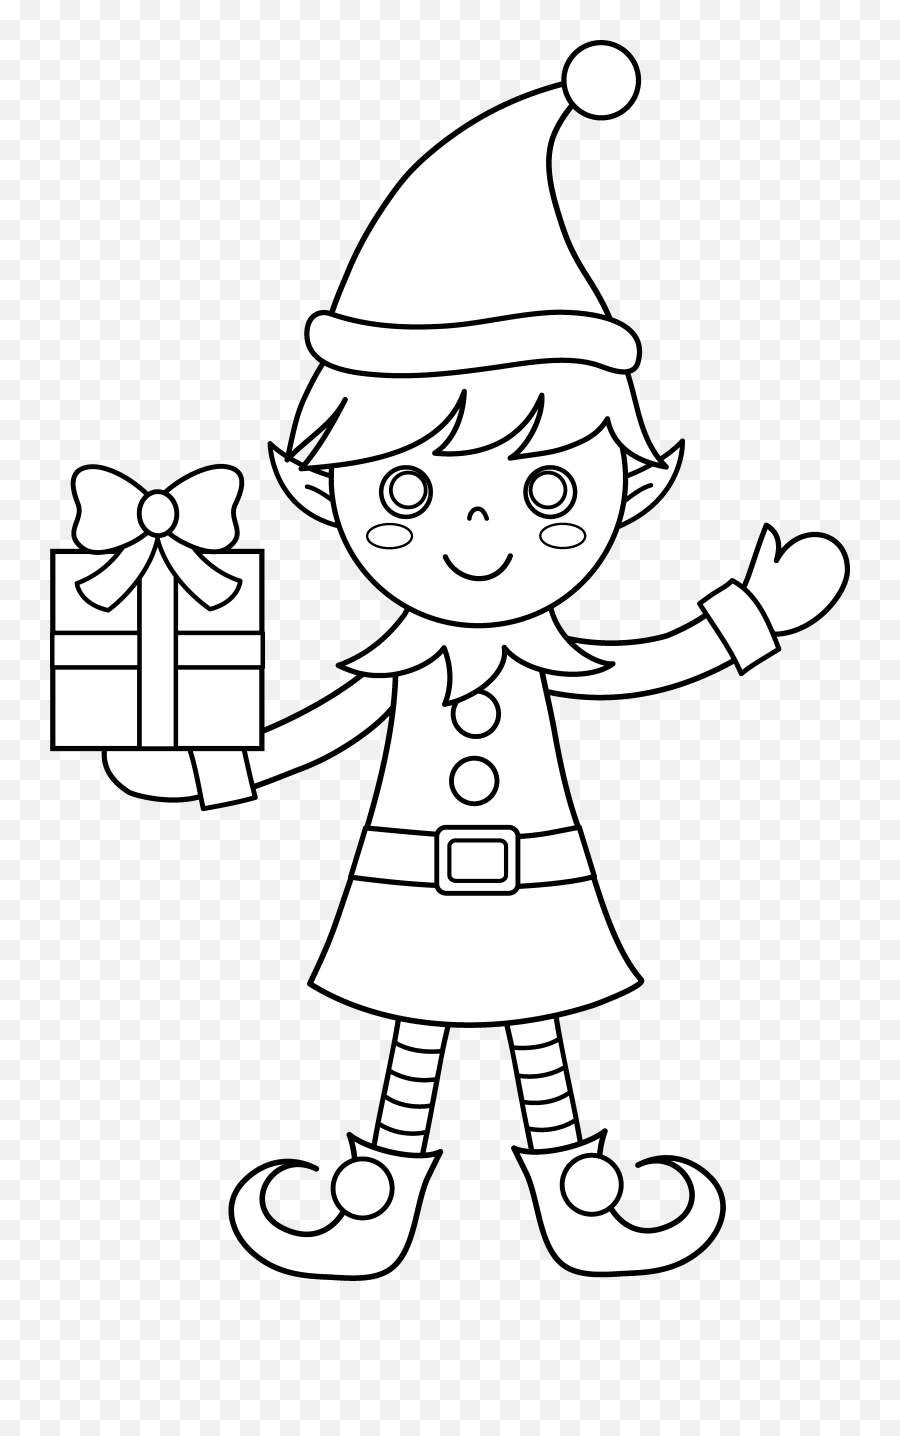 Christmas Elves Colouring Pages - Christmas Elf Coloring Pages Emoji,Emoji Color Sheets